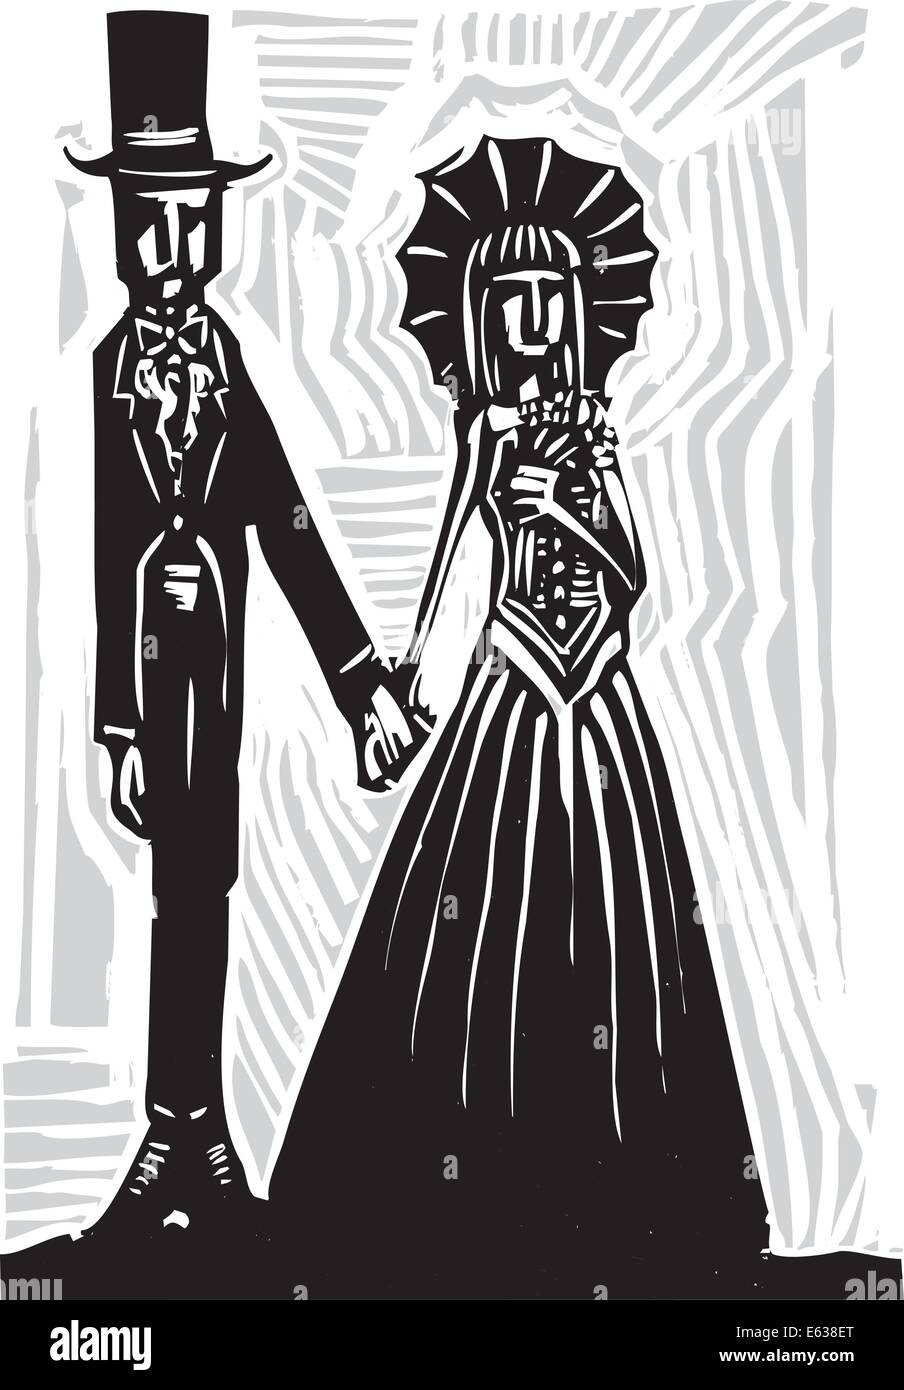 A Gothic couple in fancy dress getting married or going to prom. Stock Vector